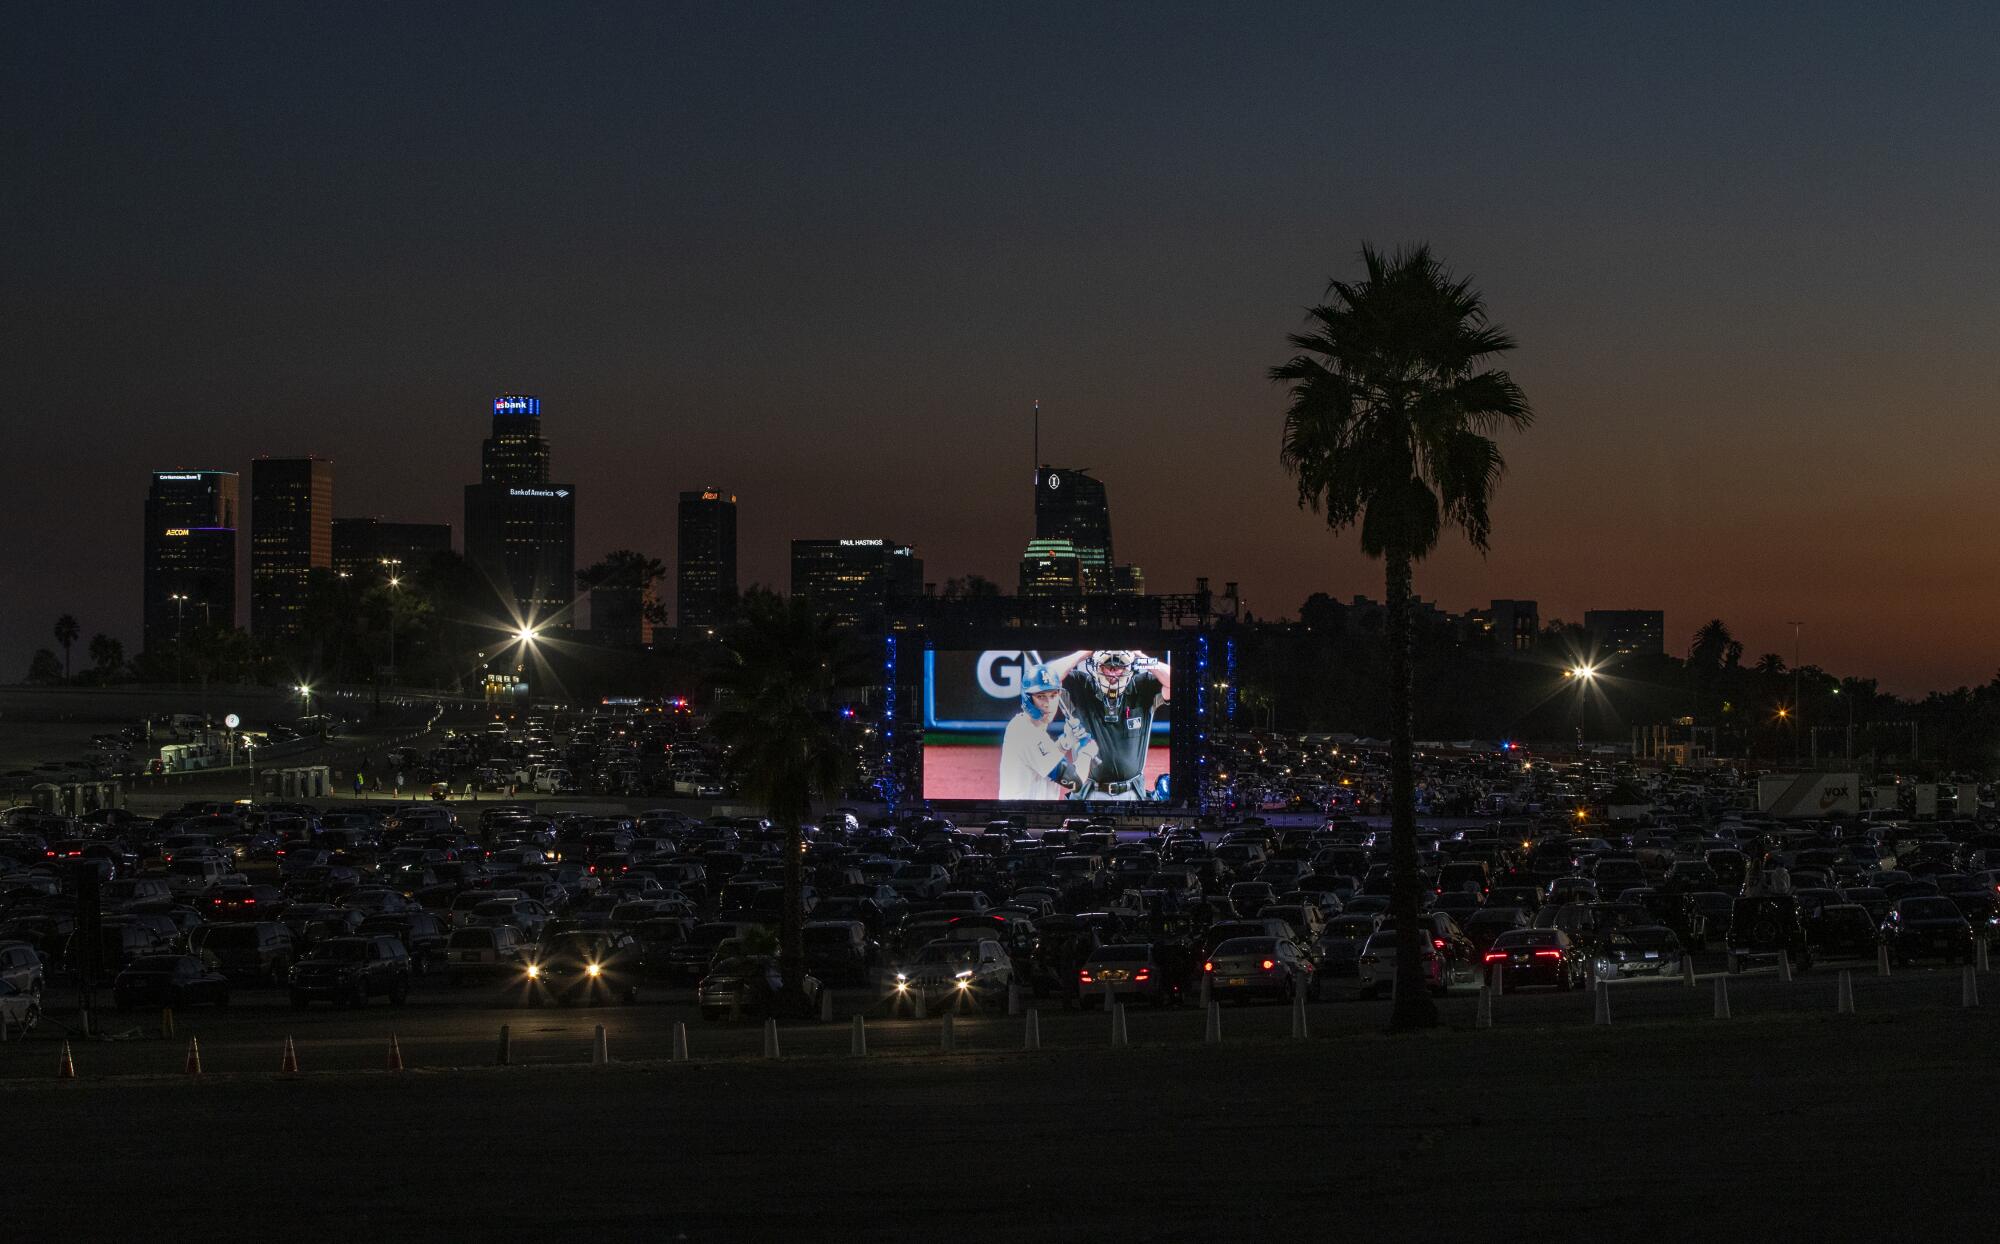 Dusks settles over the Dodger Stadium parking lot as fans watch Game 6 on the big screen.